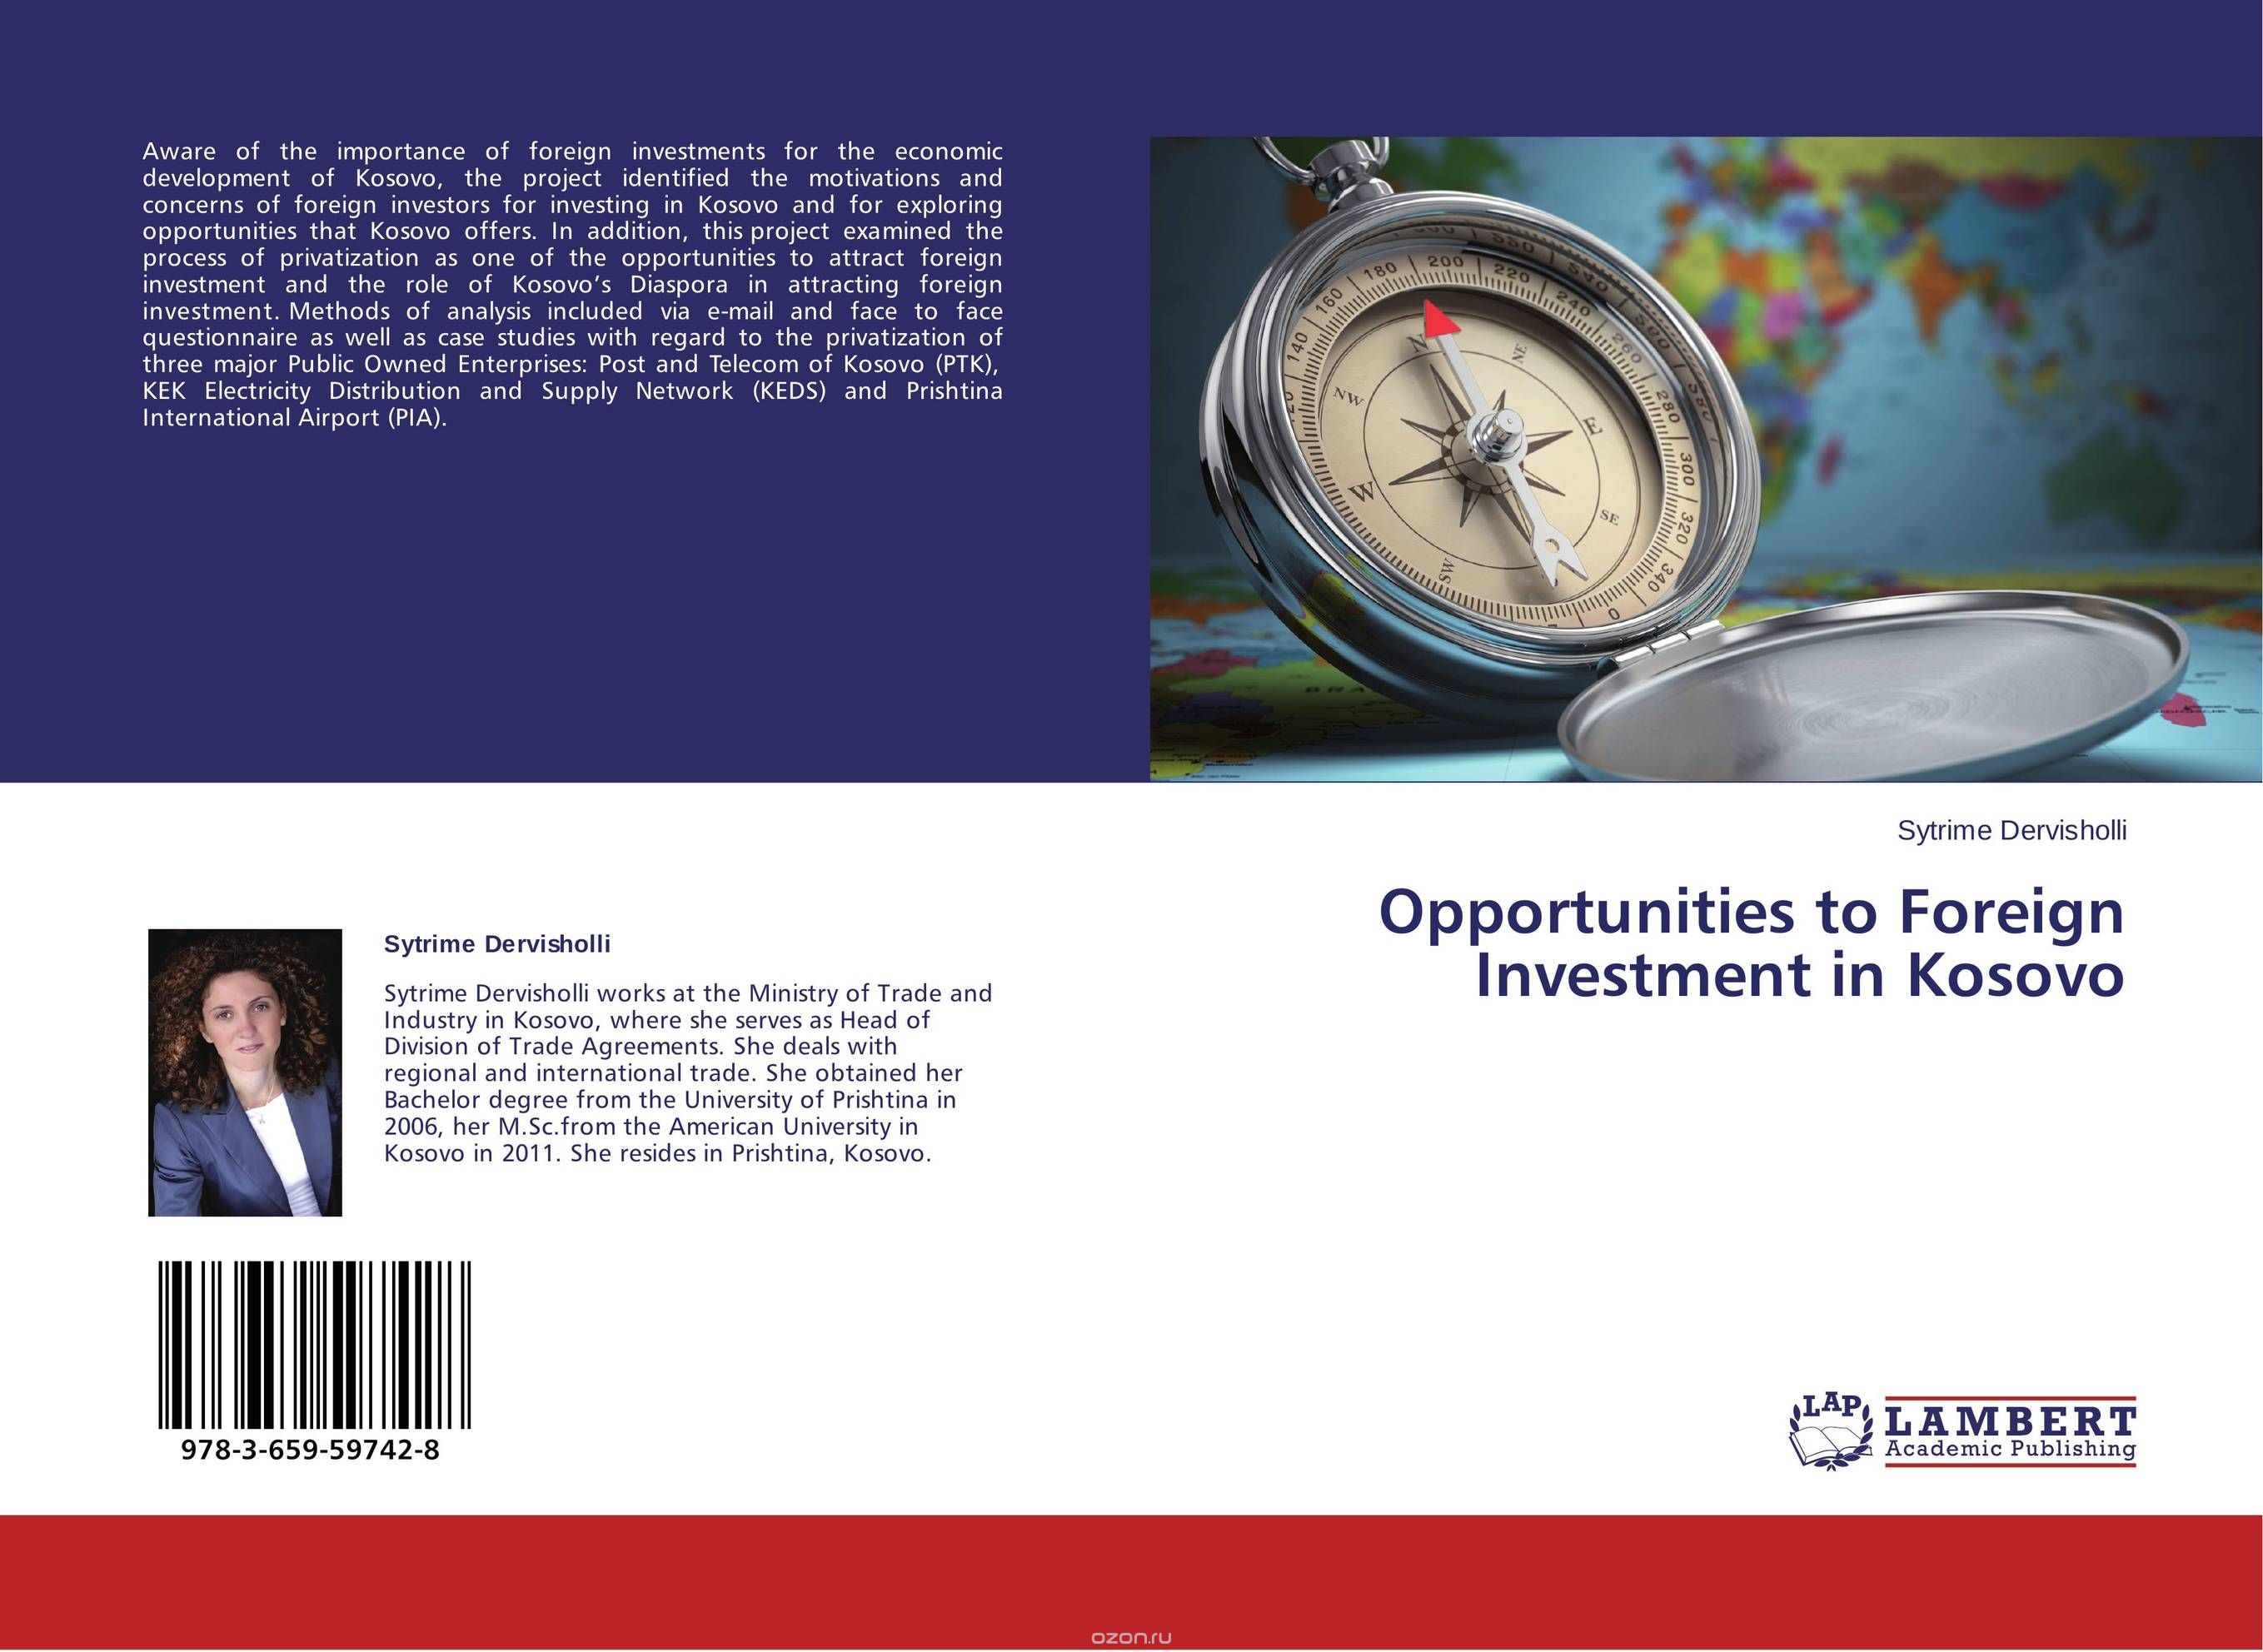 Скачать книгу "Opportunities to Foreign Investment in Kosovo"